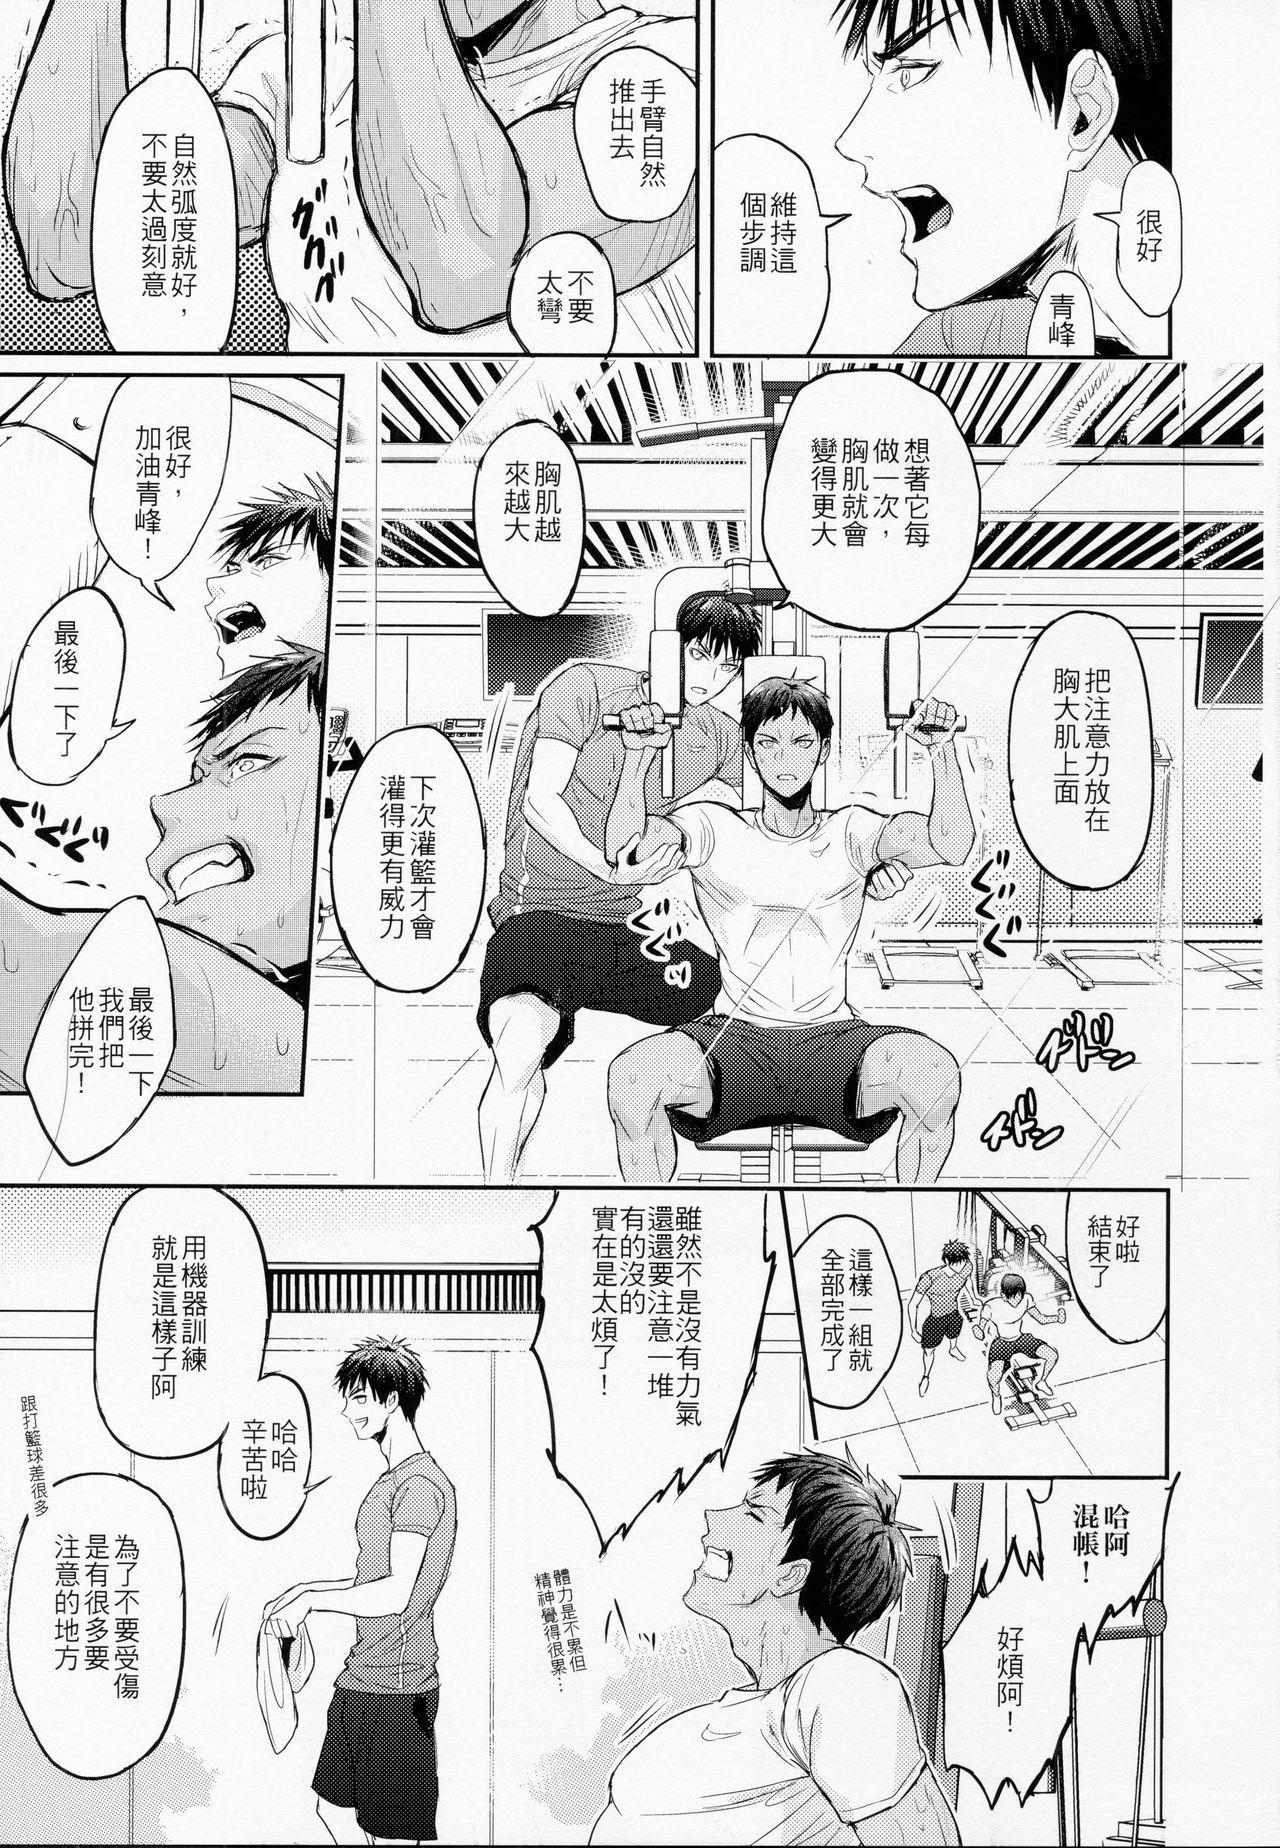 Outside This is how we WORK IT OUT - Kuroko no basuke Foot Fetish - Page 4